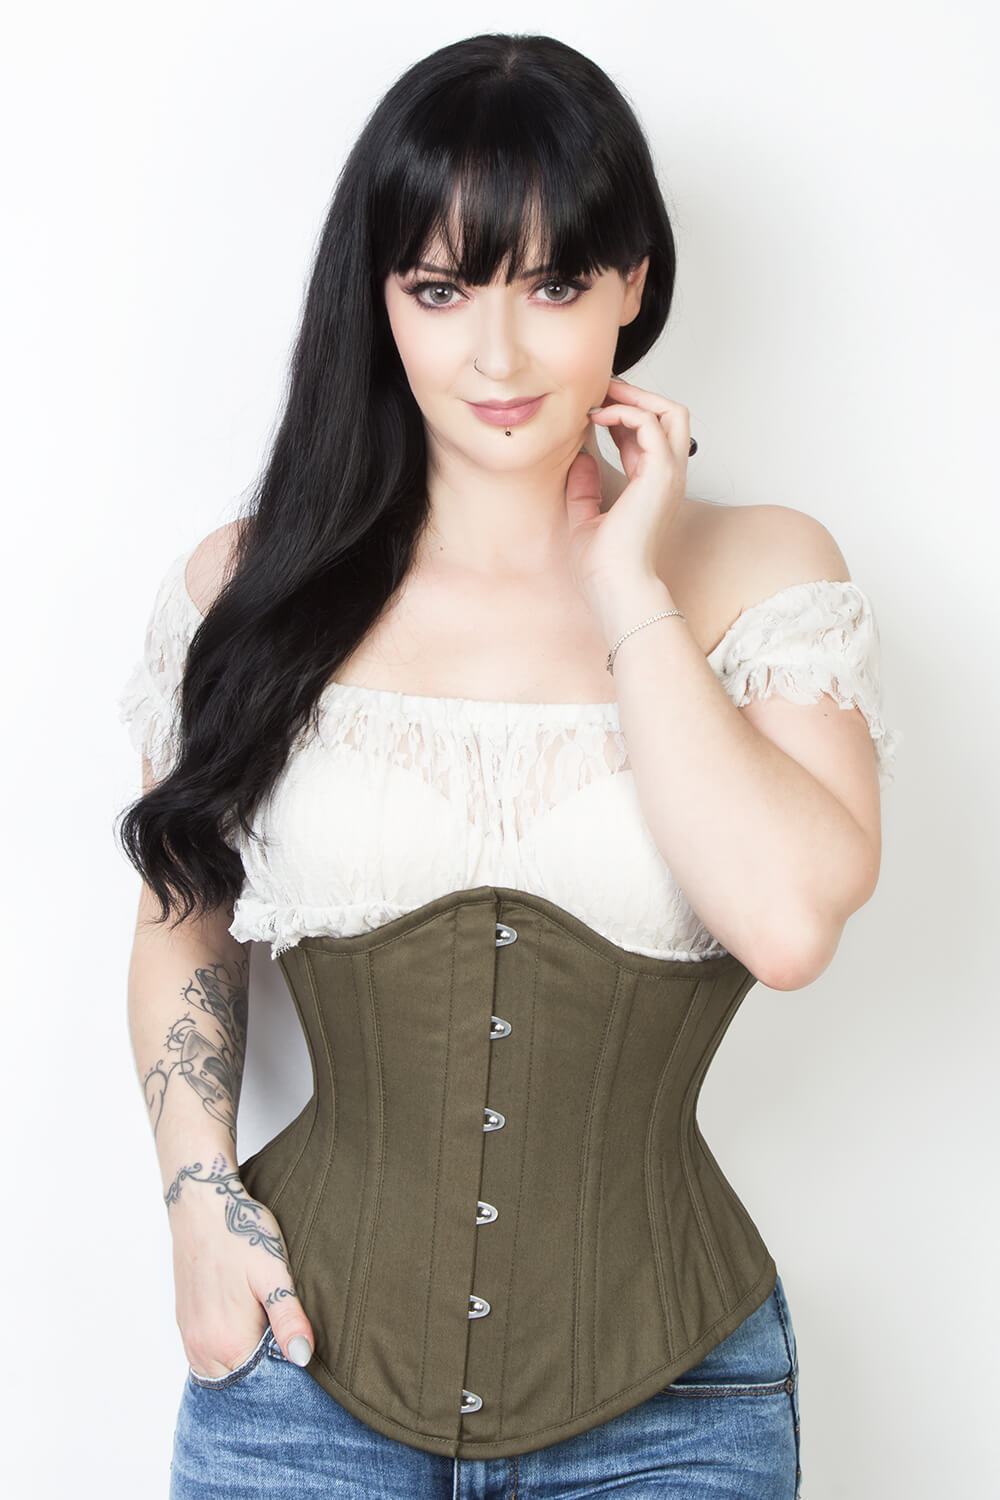 Choices of Bespoke Cotton Underbust Corset at affordable price